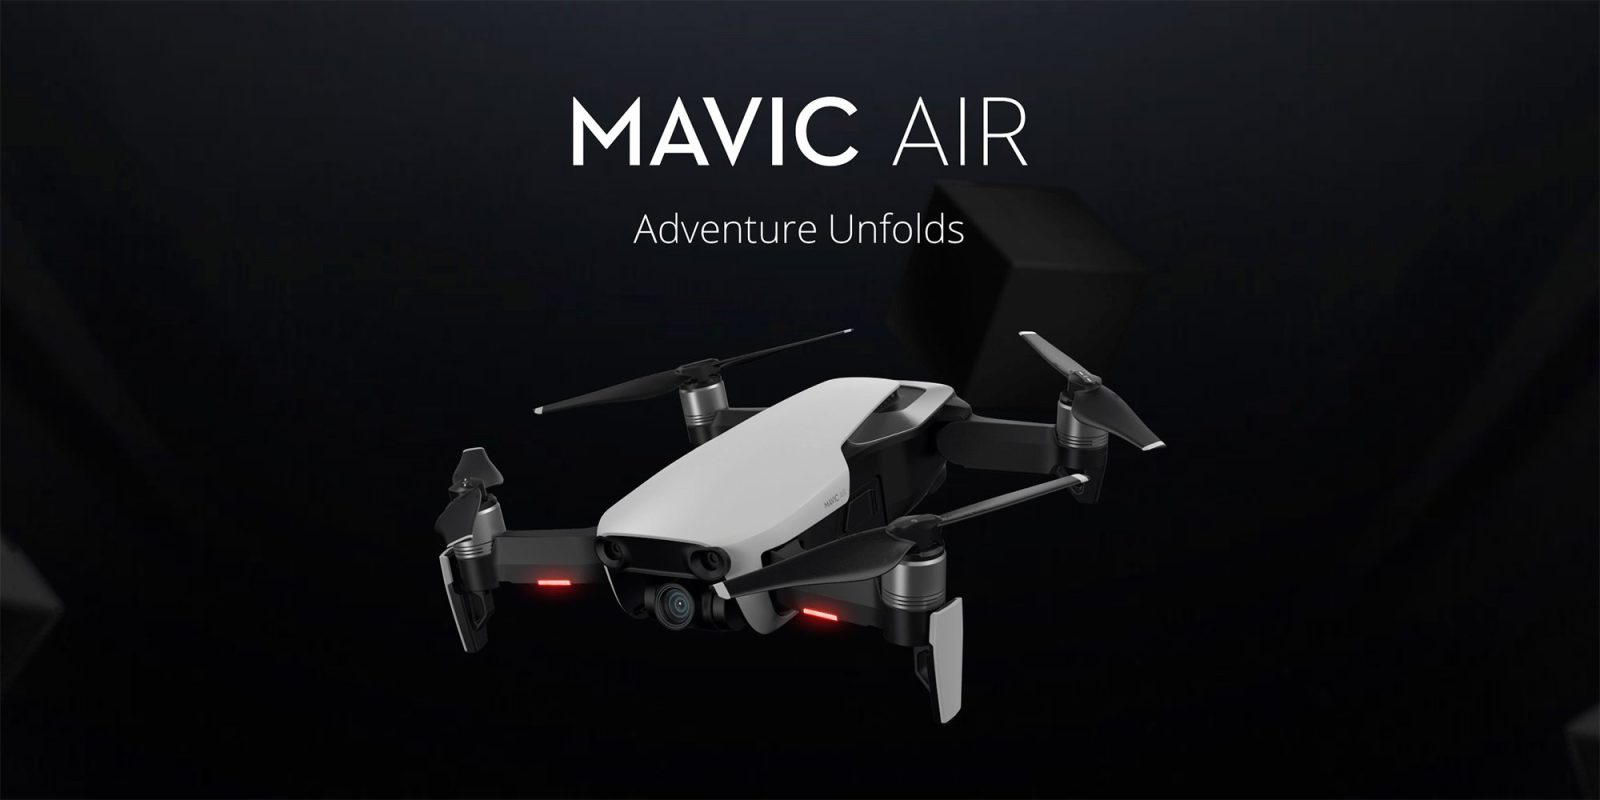 DJI Mavic Air 2 tips and tricks: 7 ways to master our favorite drone